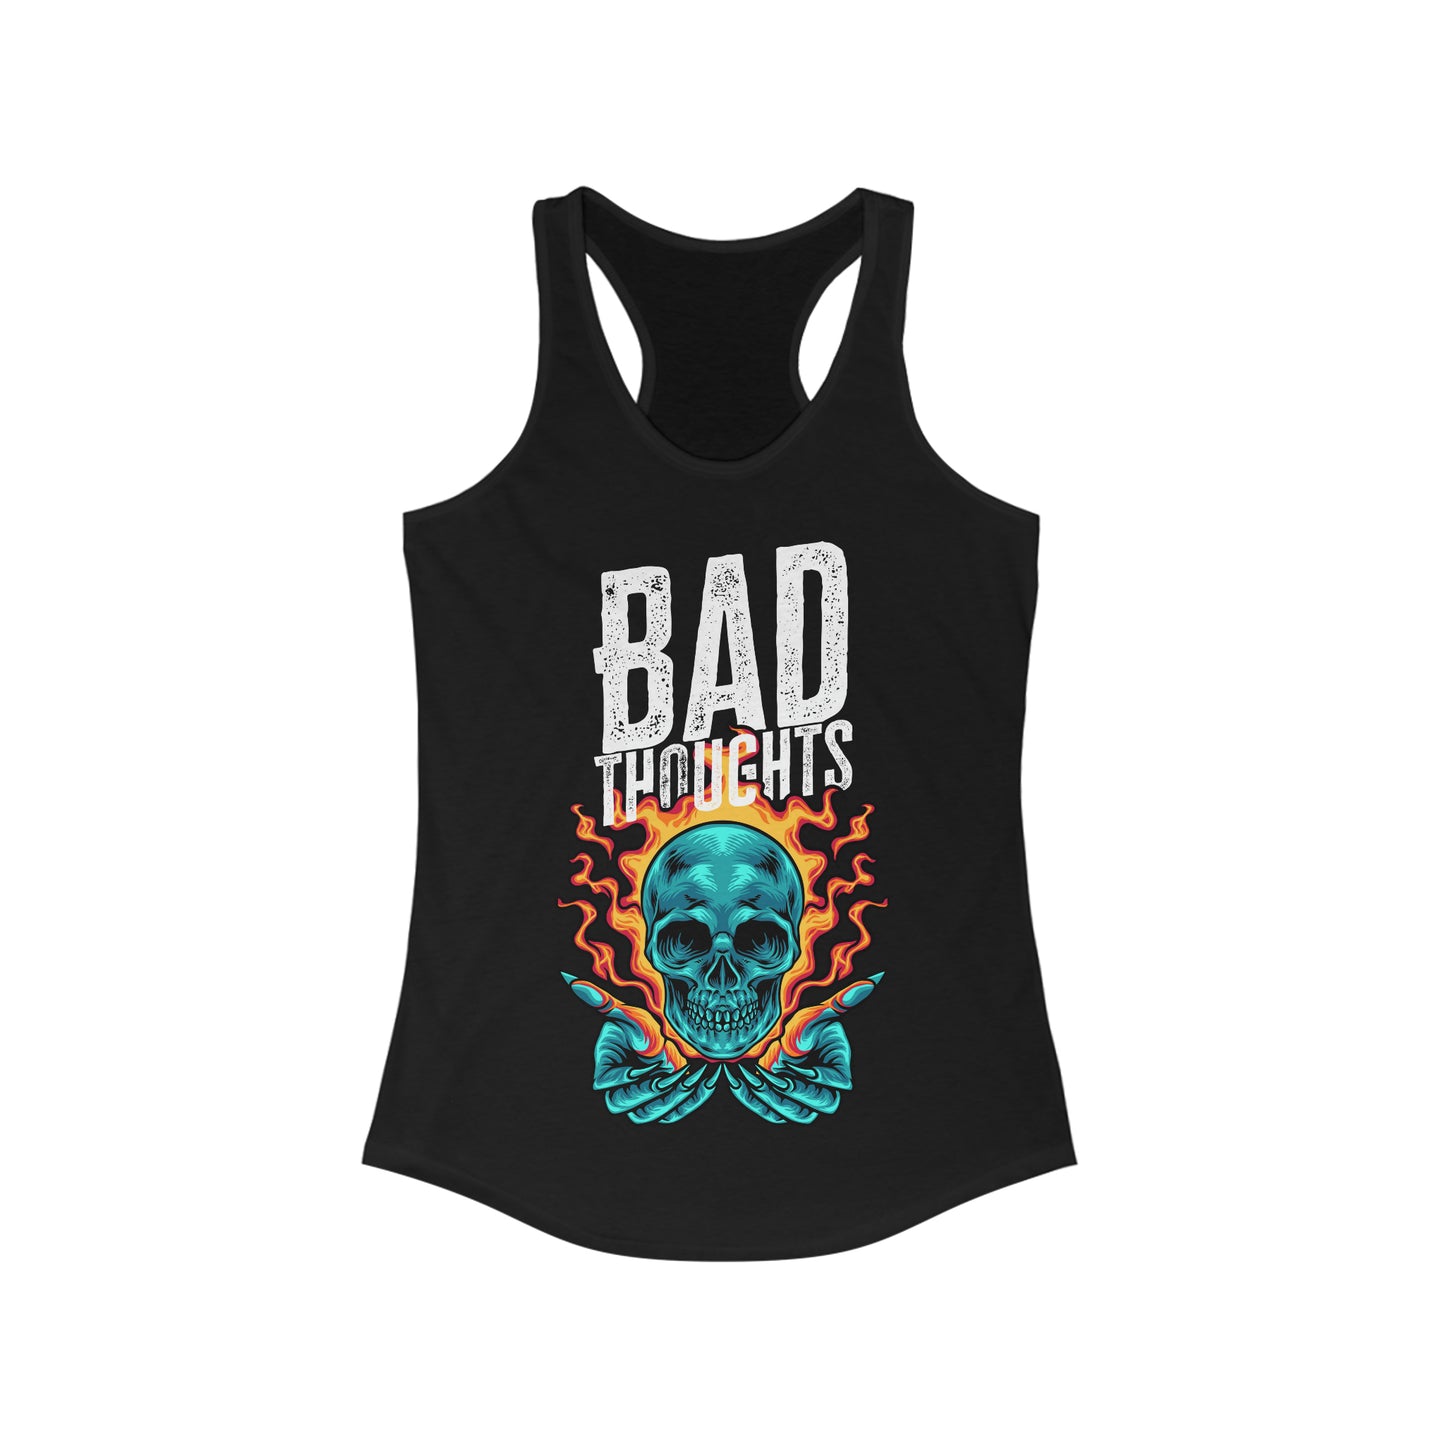 Bad Thoughts Women's Ideal Racerback Tank